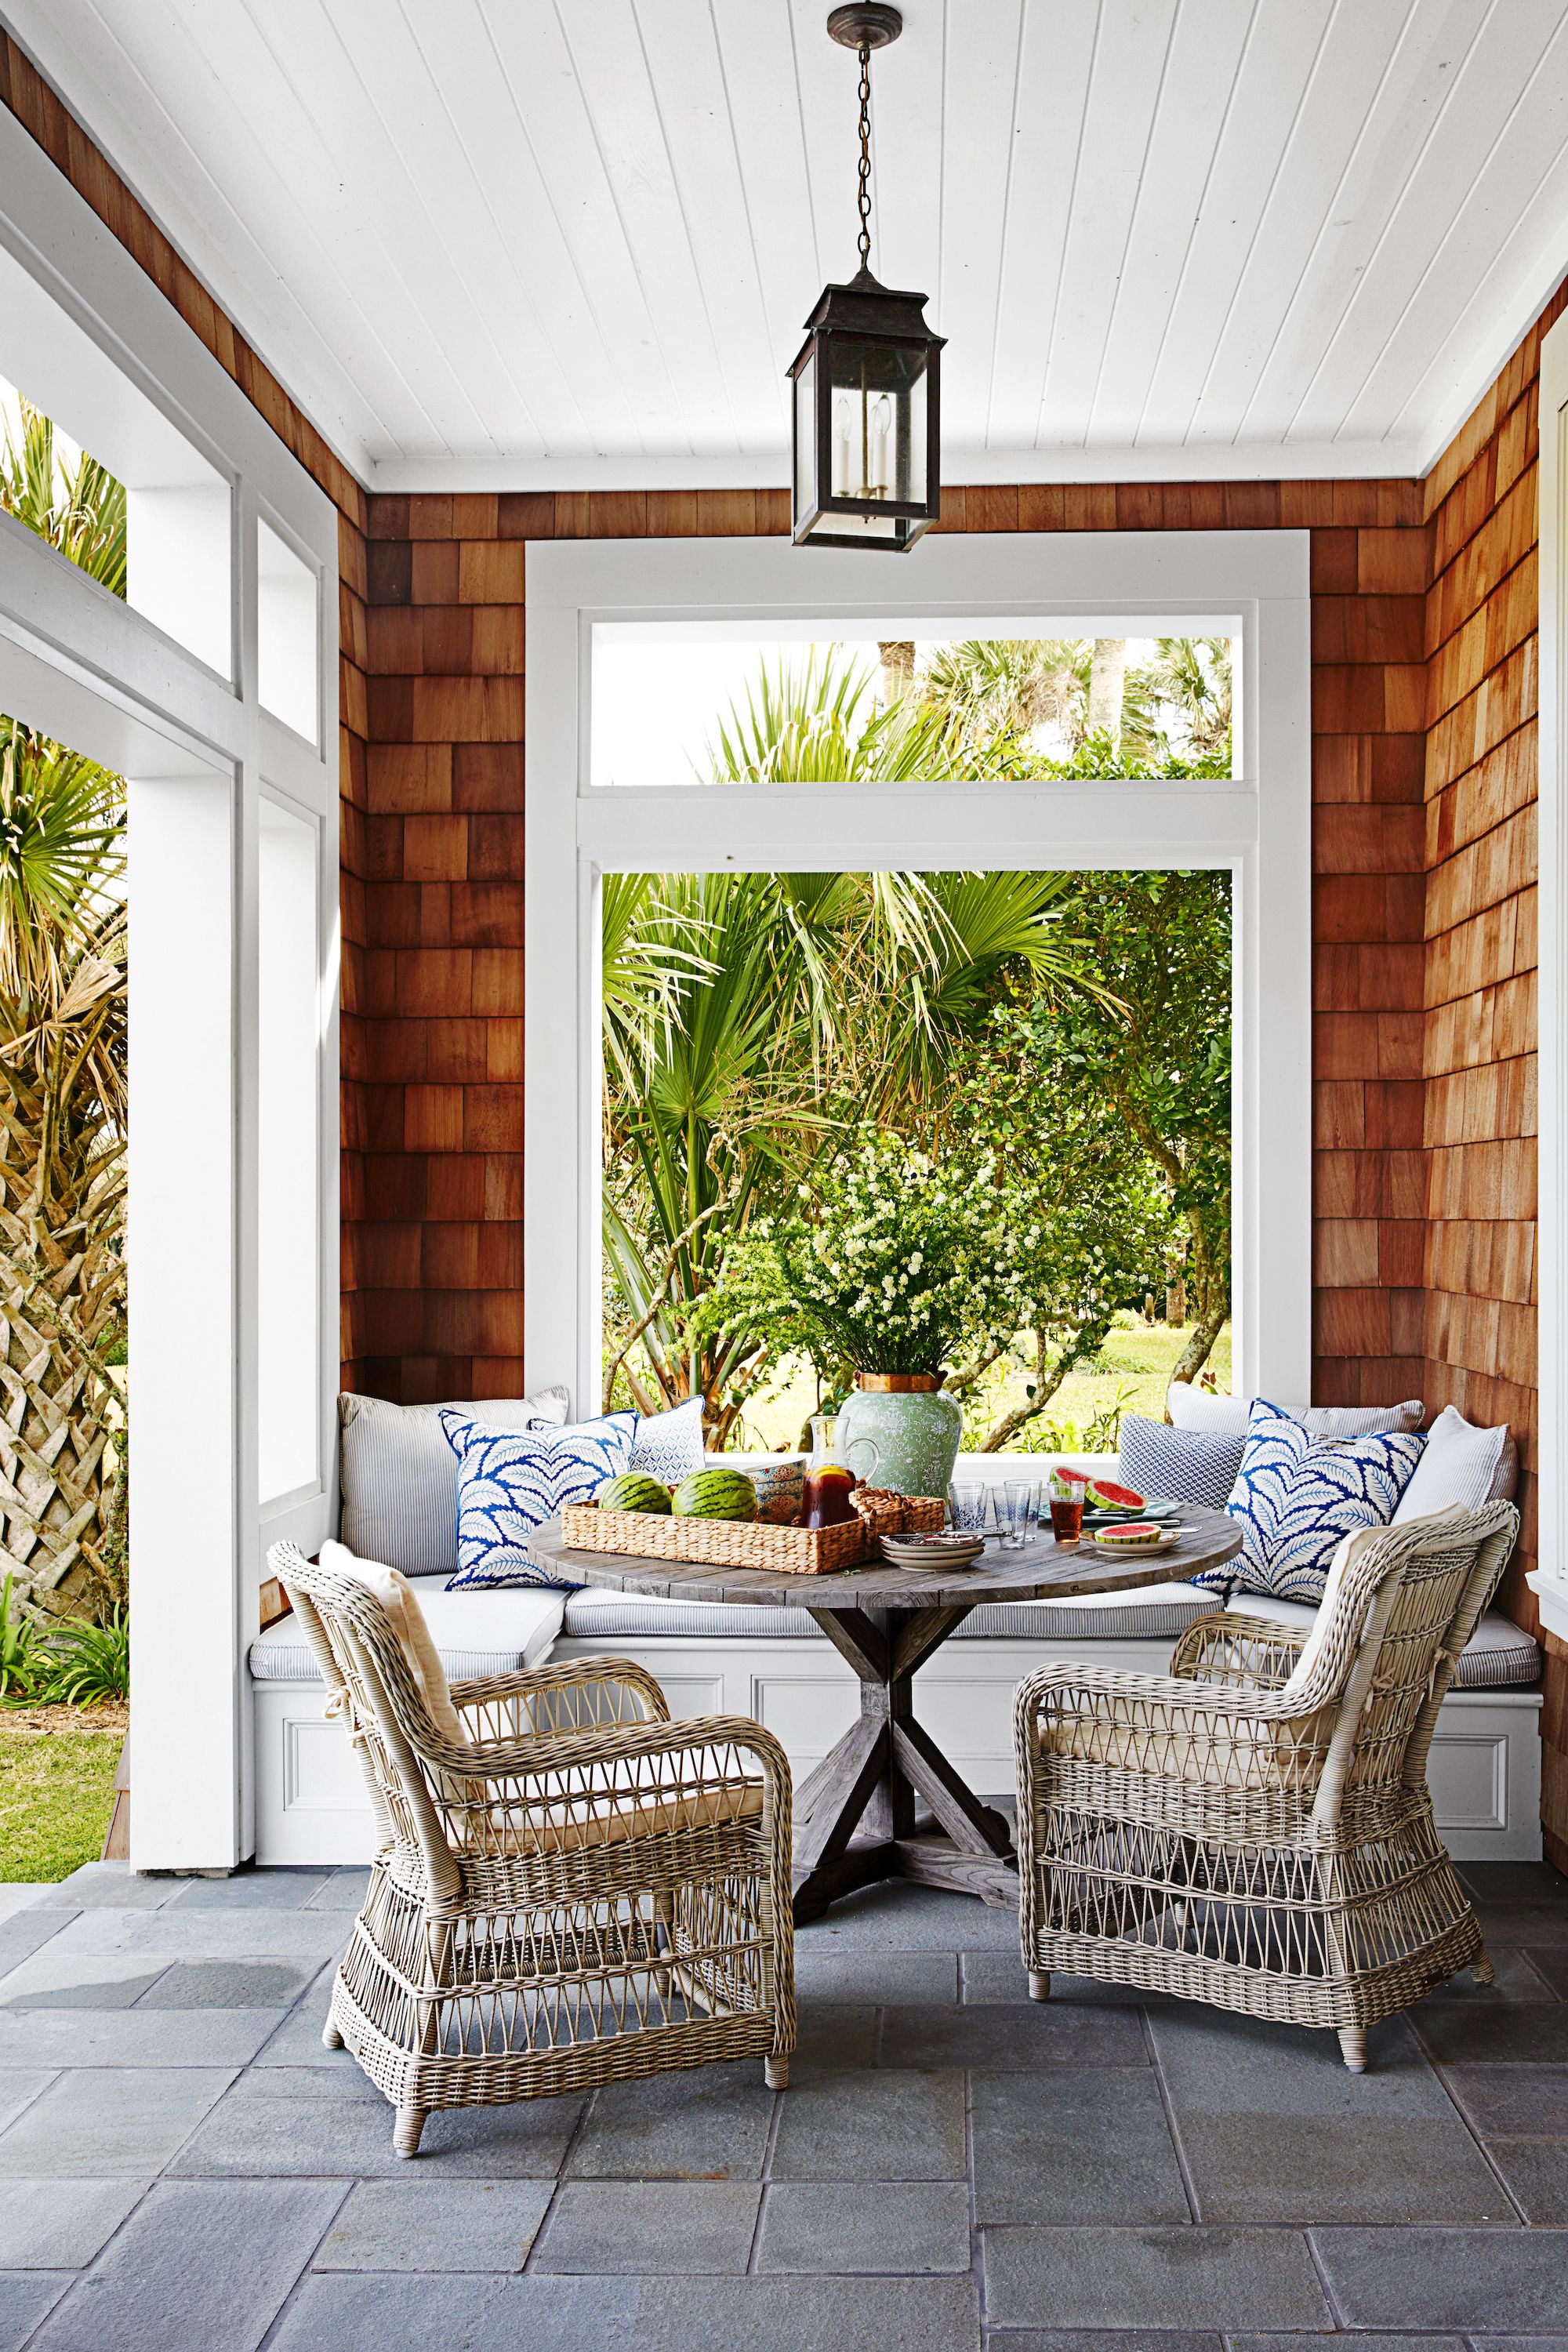 35 Best Patio And Porch Design Ideas Decorating Your